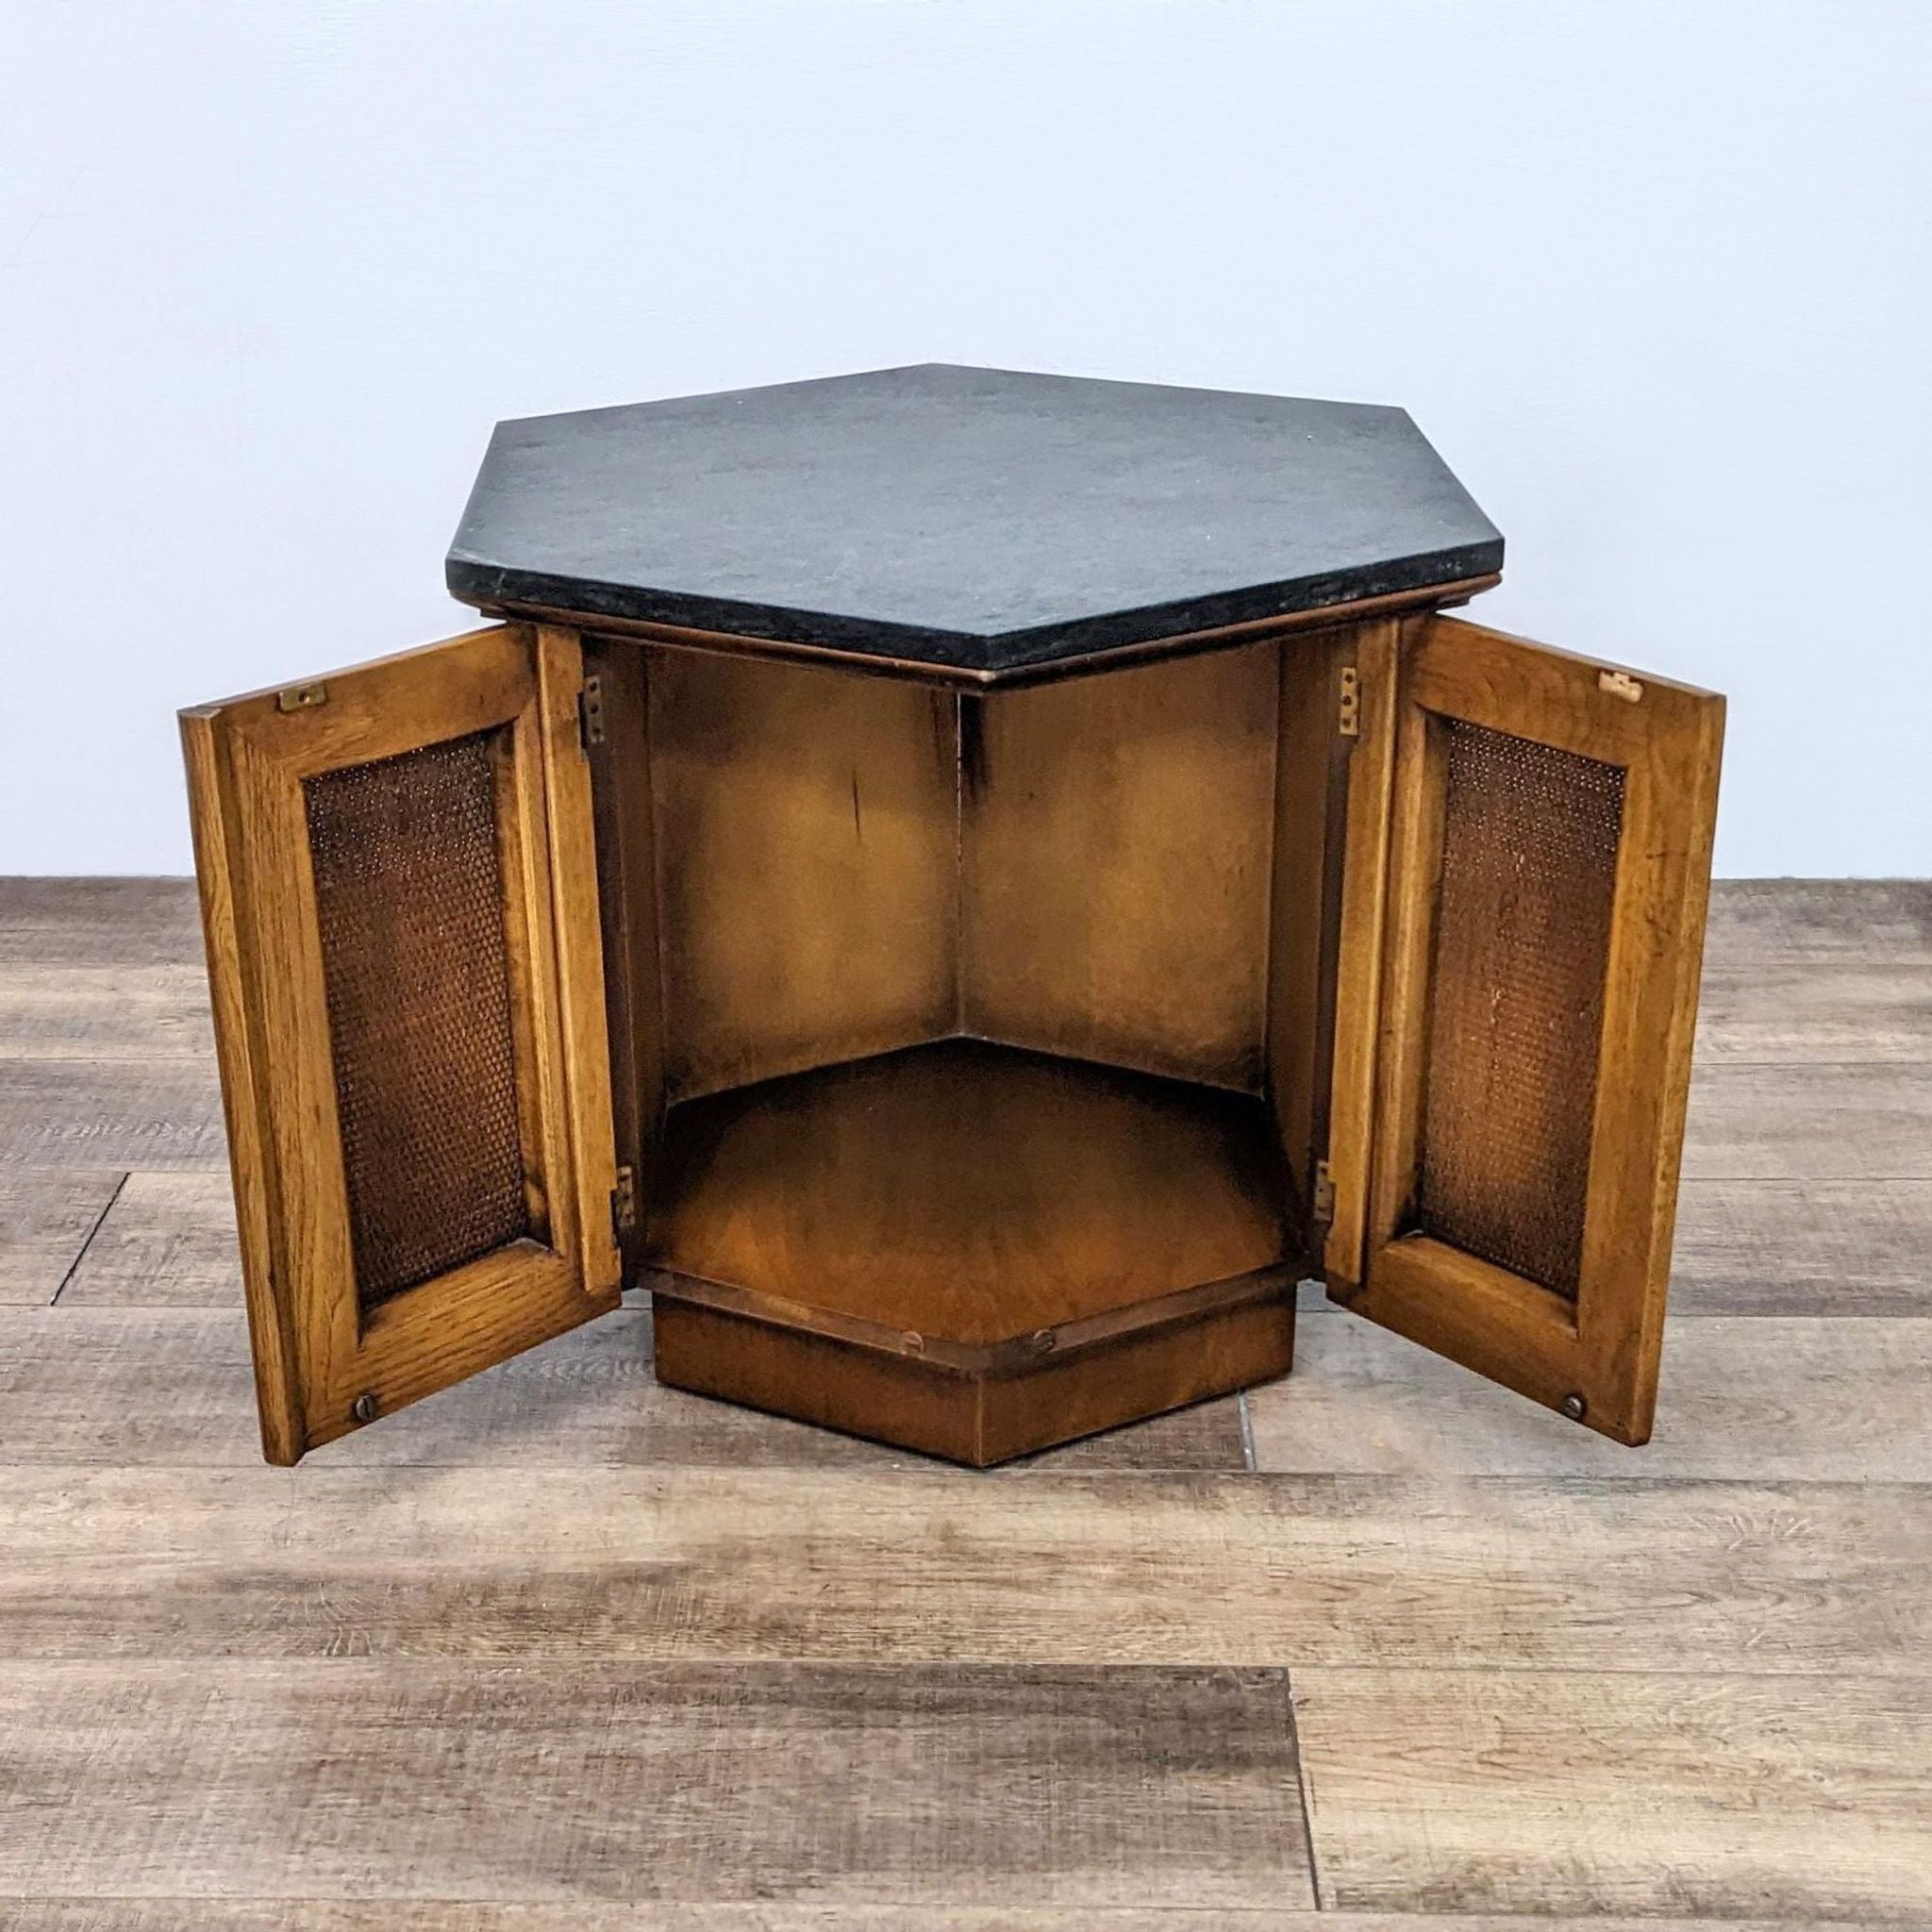 Reperch hexagonal end table showing open rattan doors with interior storage space.